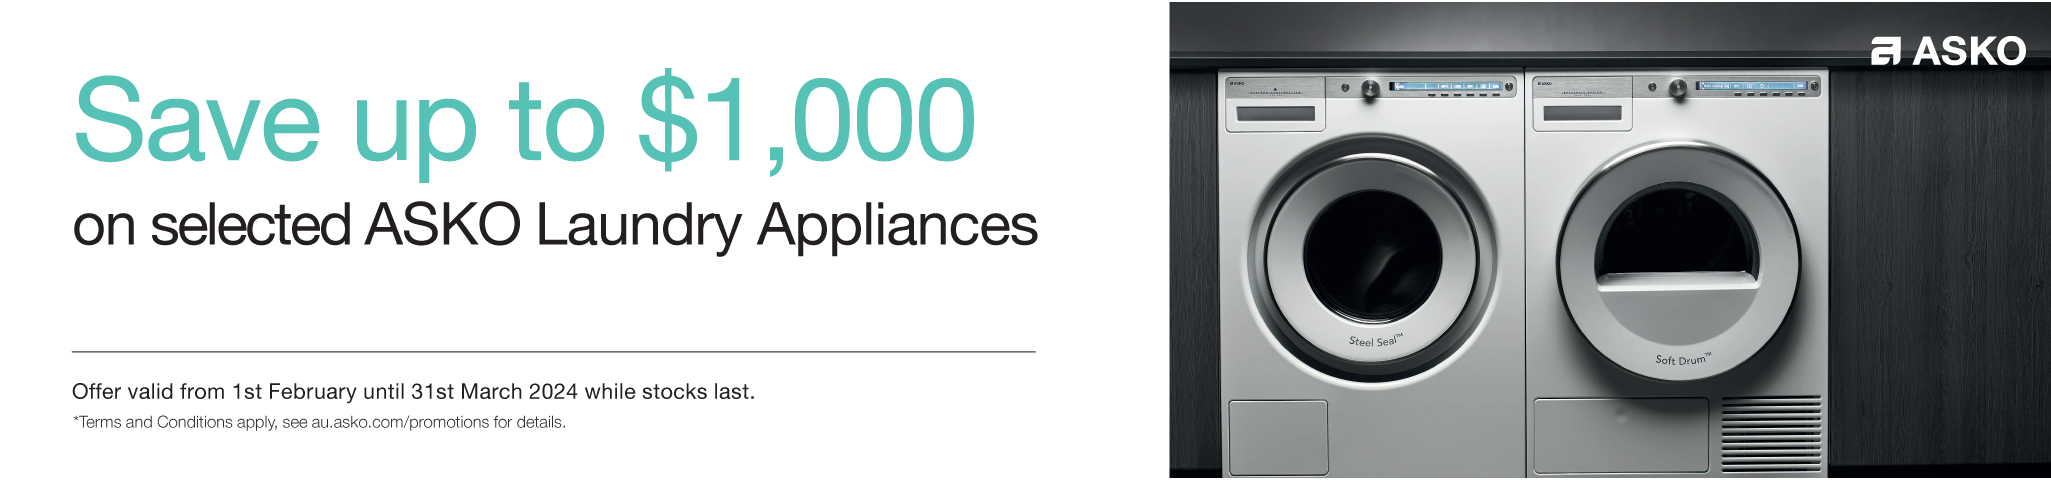 Save Up To $1,000* On Selected ASKO Laundry Appliances